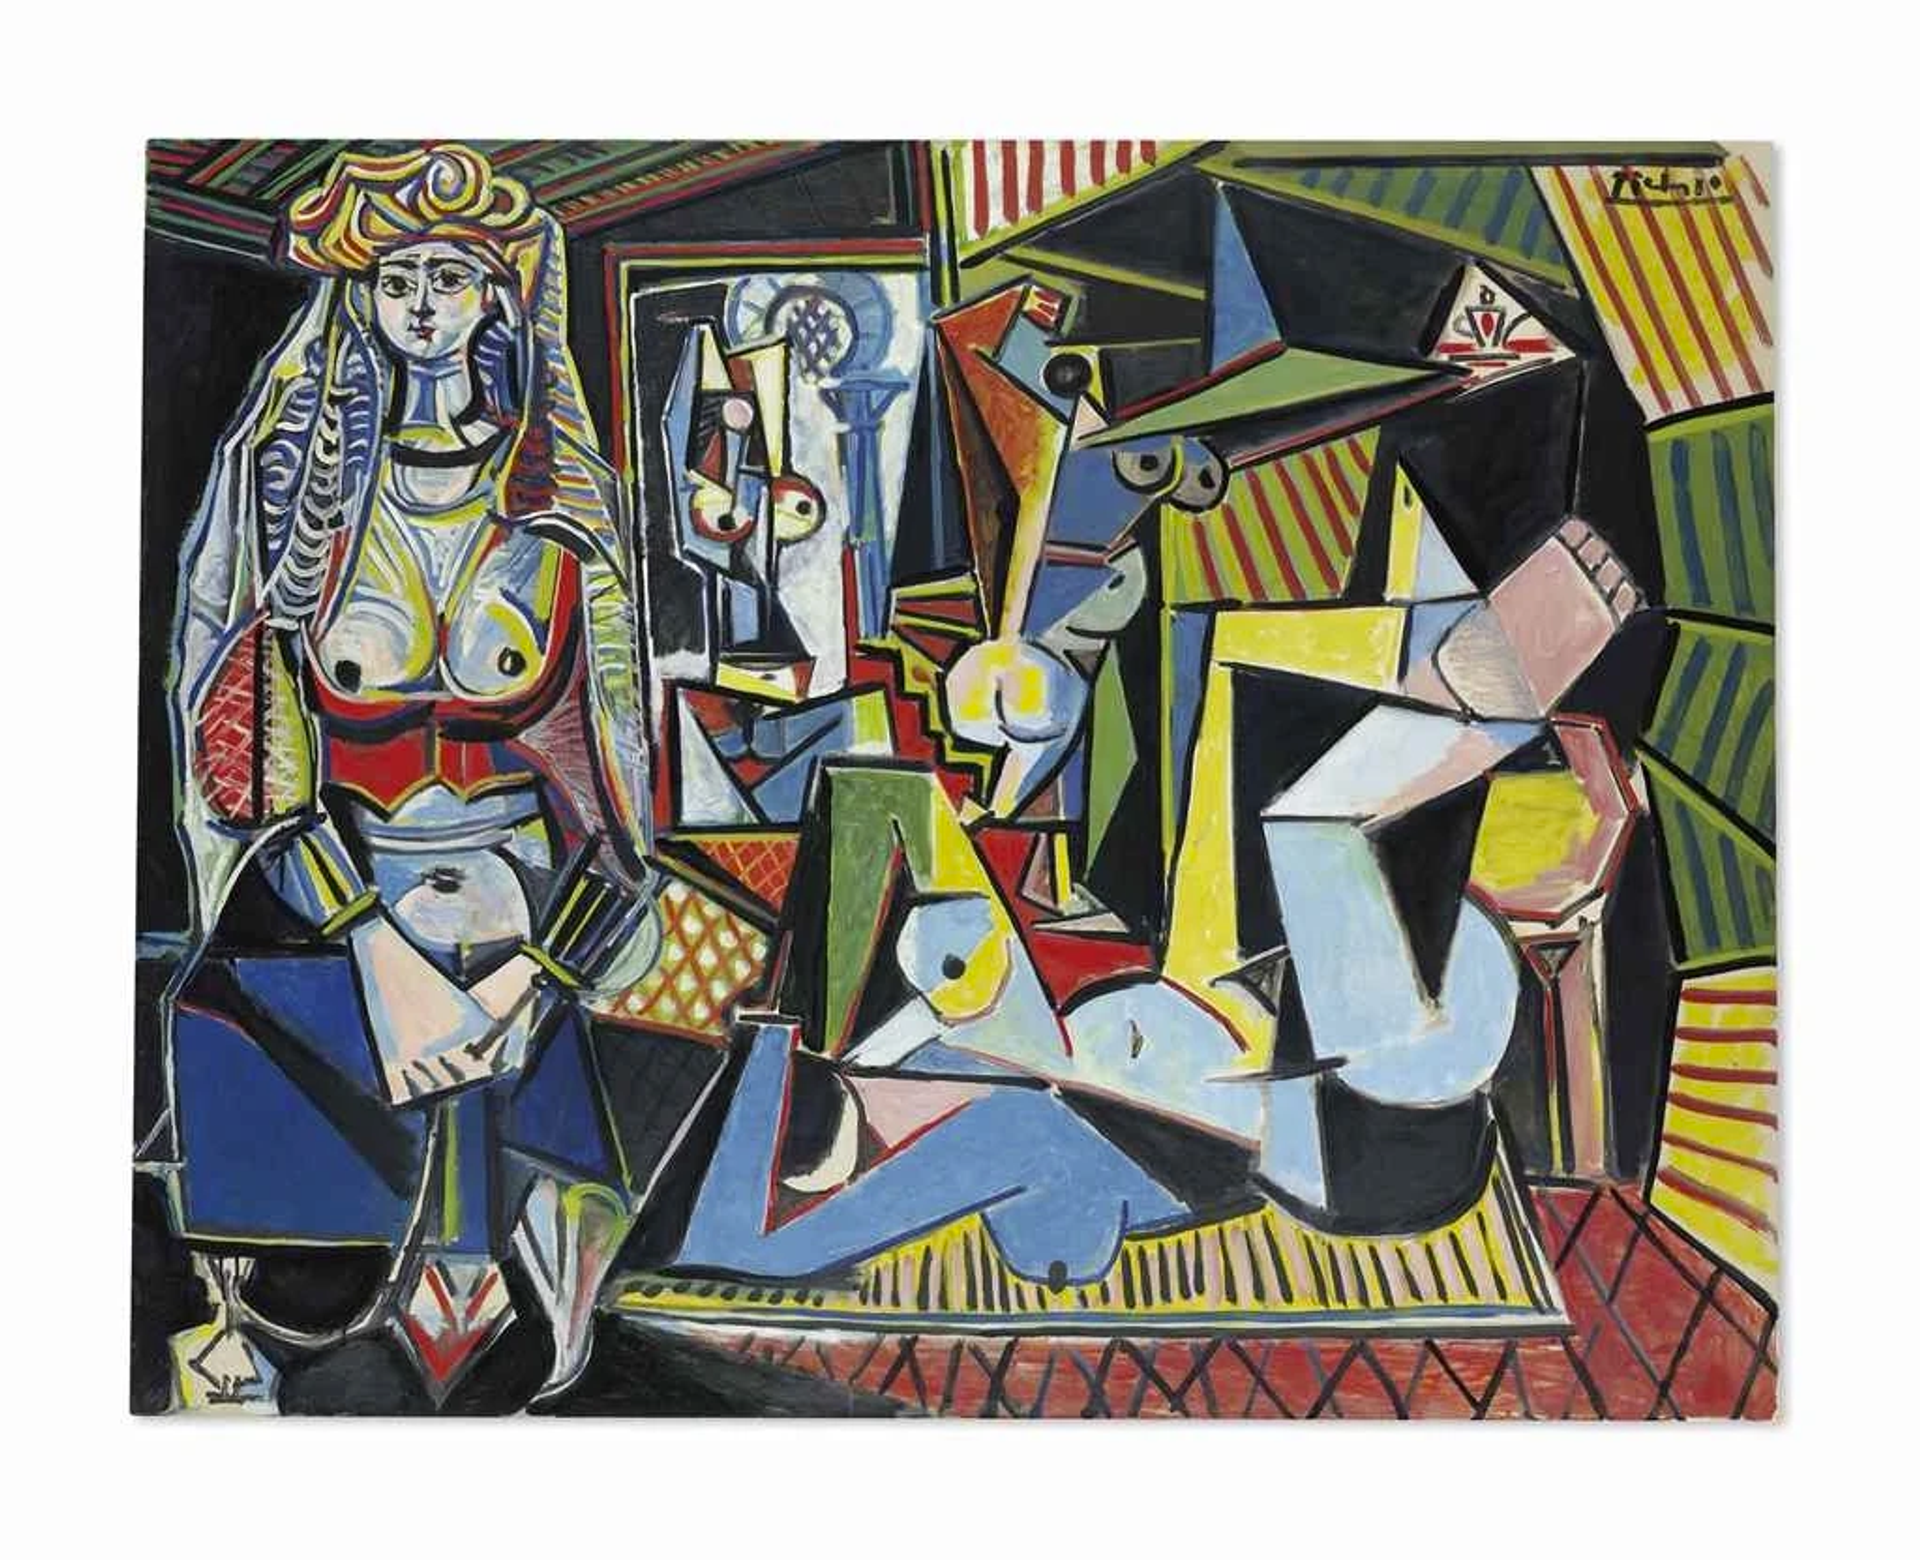 Painting by Pablo Picasso, depicting women of Algiers in their apartment. The women are structurally deconstructed into angular shapes. The forms are depicted in blues, greens, yellows, red and black.